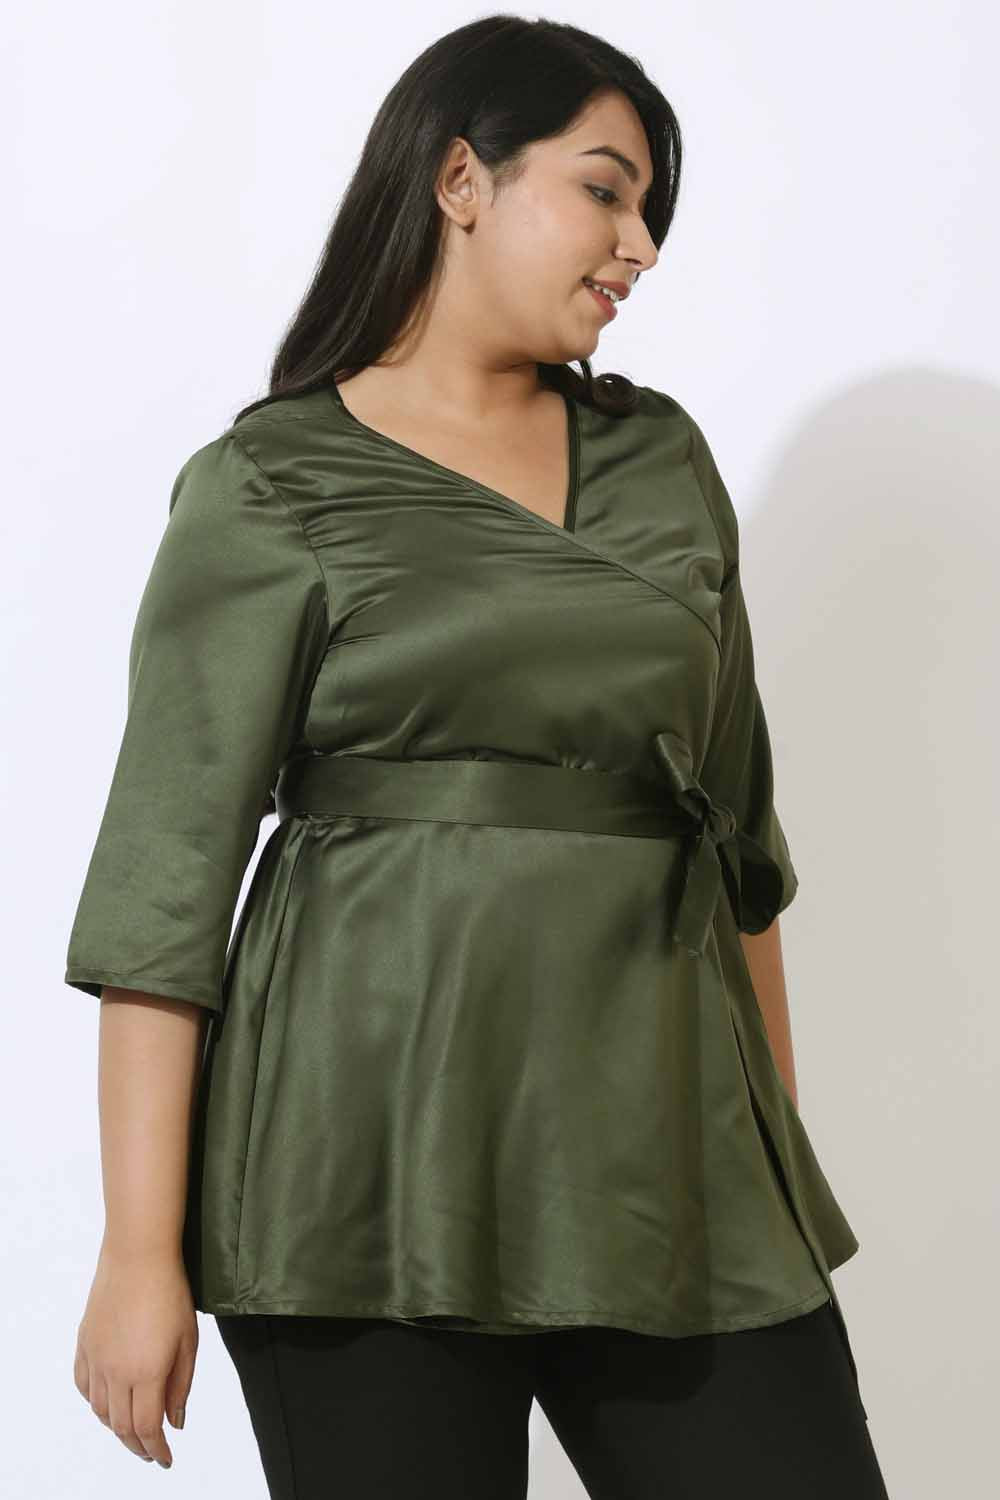 Plus Size Olive Satin Wrap Top for Women